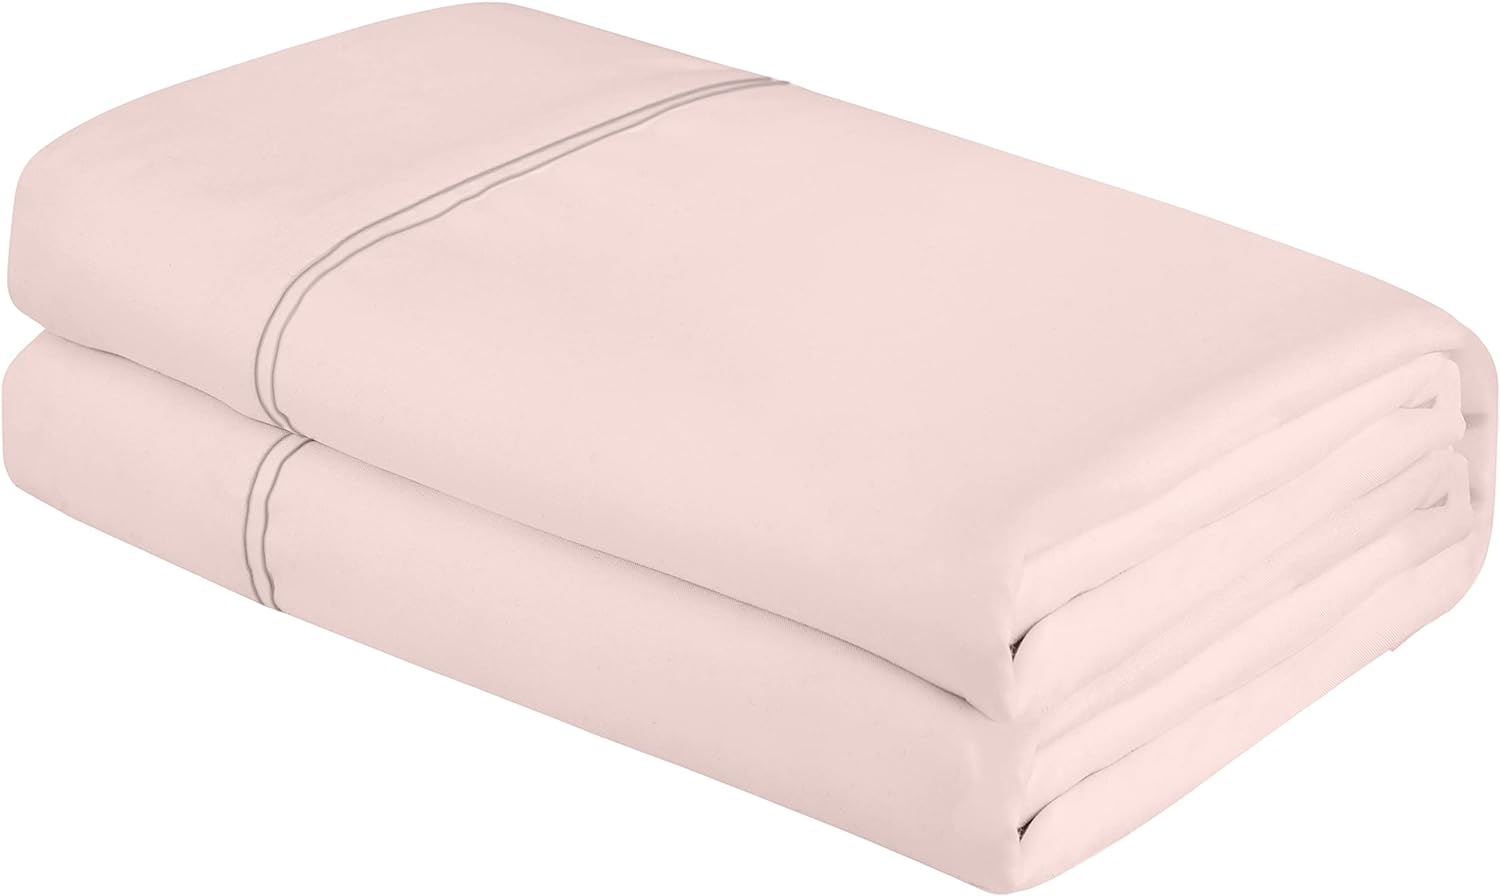 Royale Linens Full Size Flat Sheet Only - Brushed 1800 Microfiber - Ultra Soft & Breathable - Wrinkle & Stain Resistant - Hotel Quality Flat Sheet Sold Separately - Top Sheet for Bed - (Full, Pink)